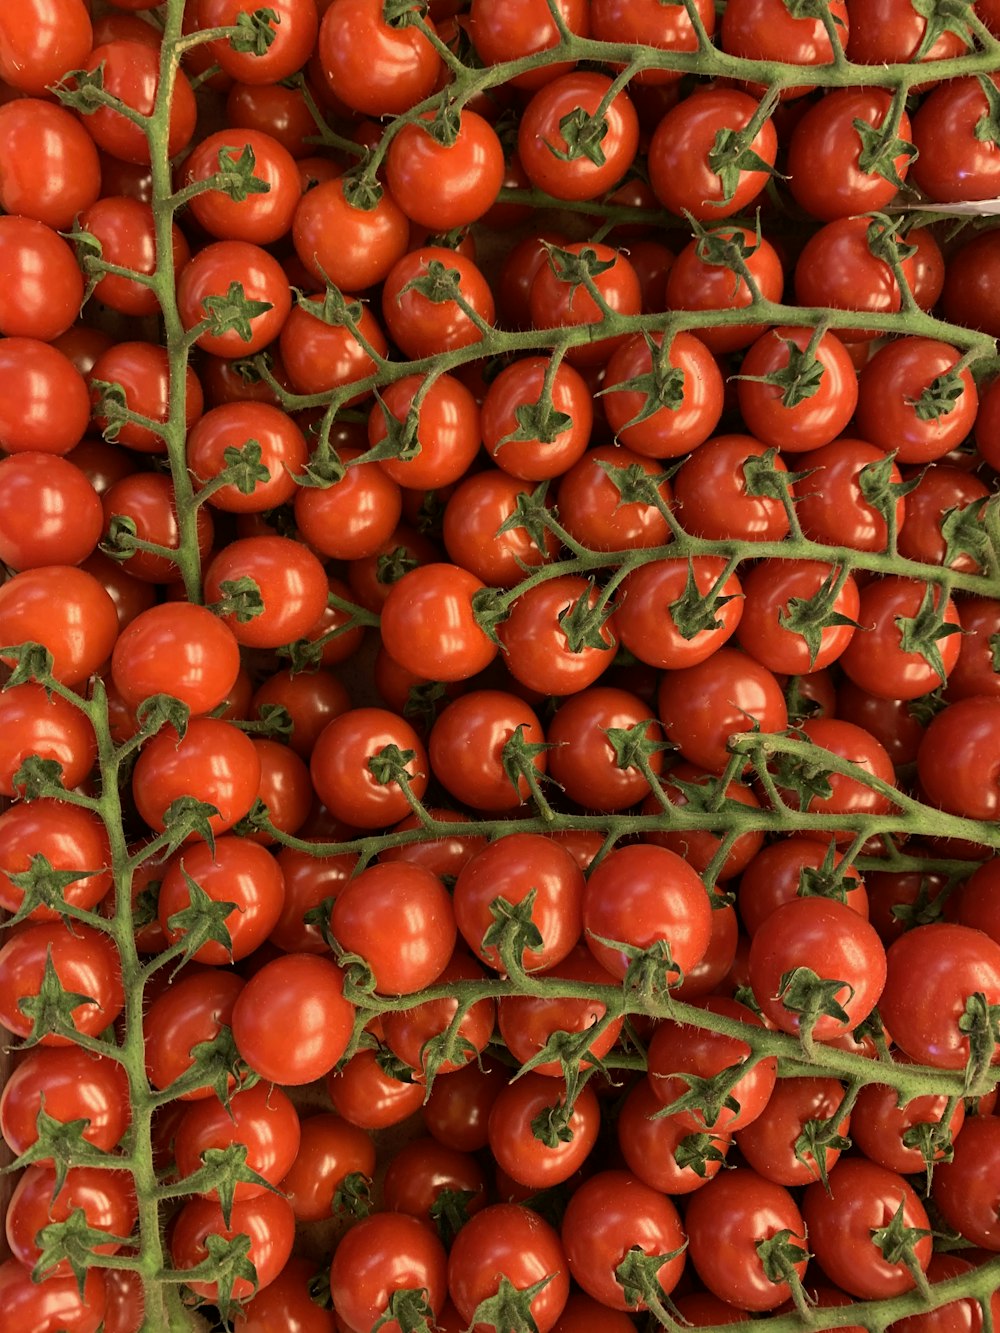 red tomatoes in close up photography